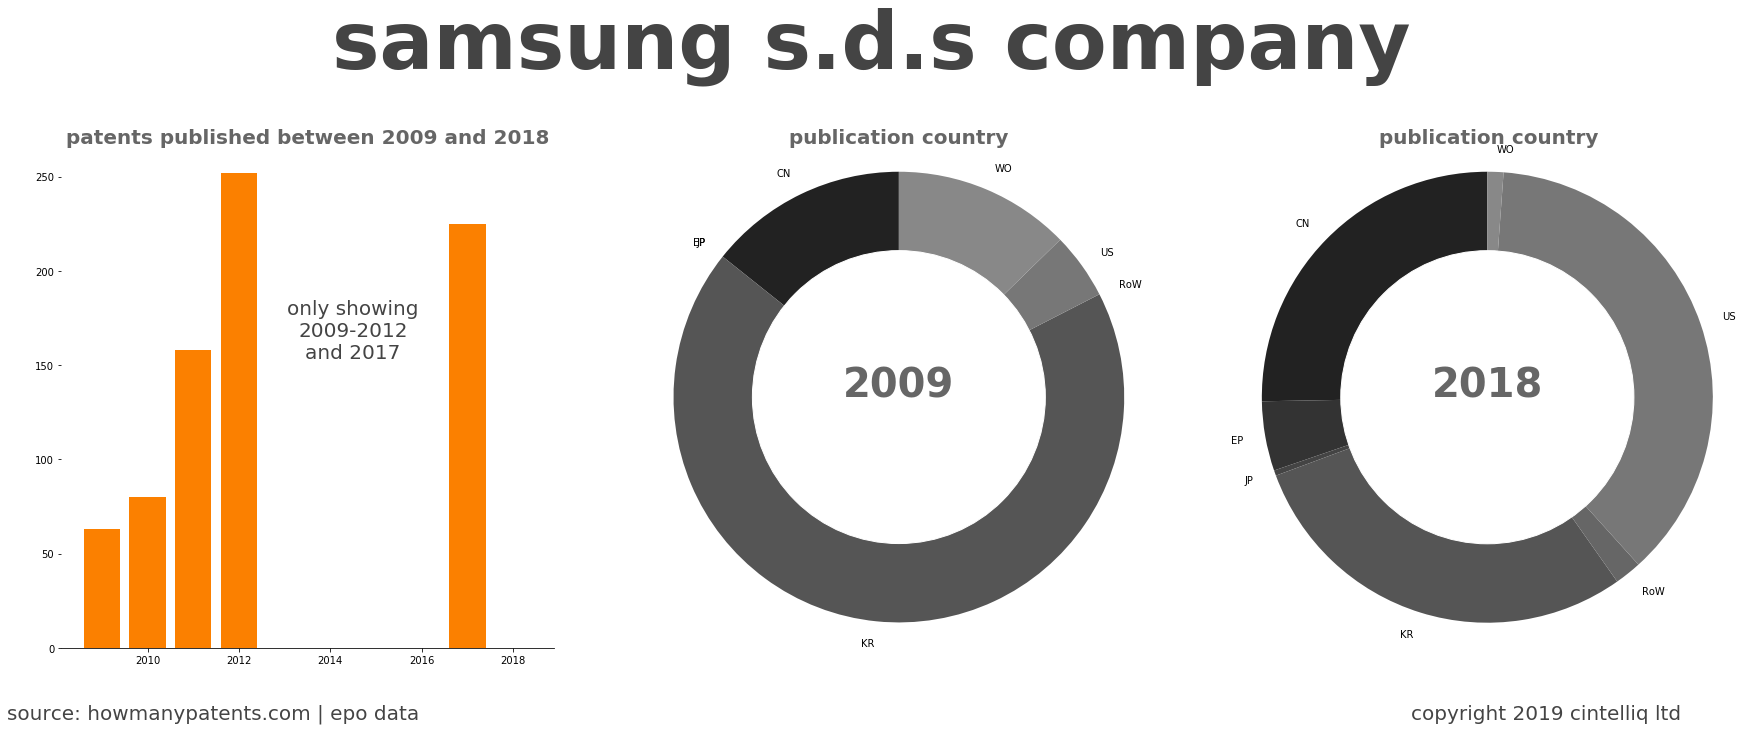 summary of patents for Samsung S.D.S Company